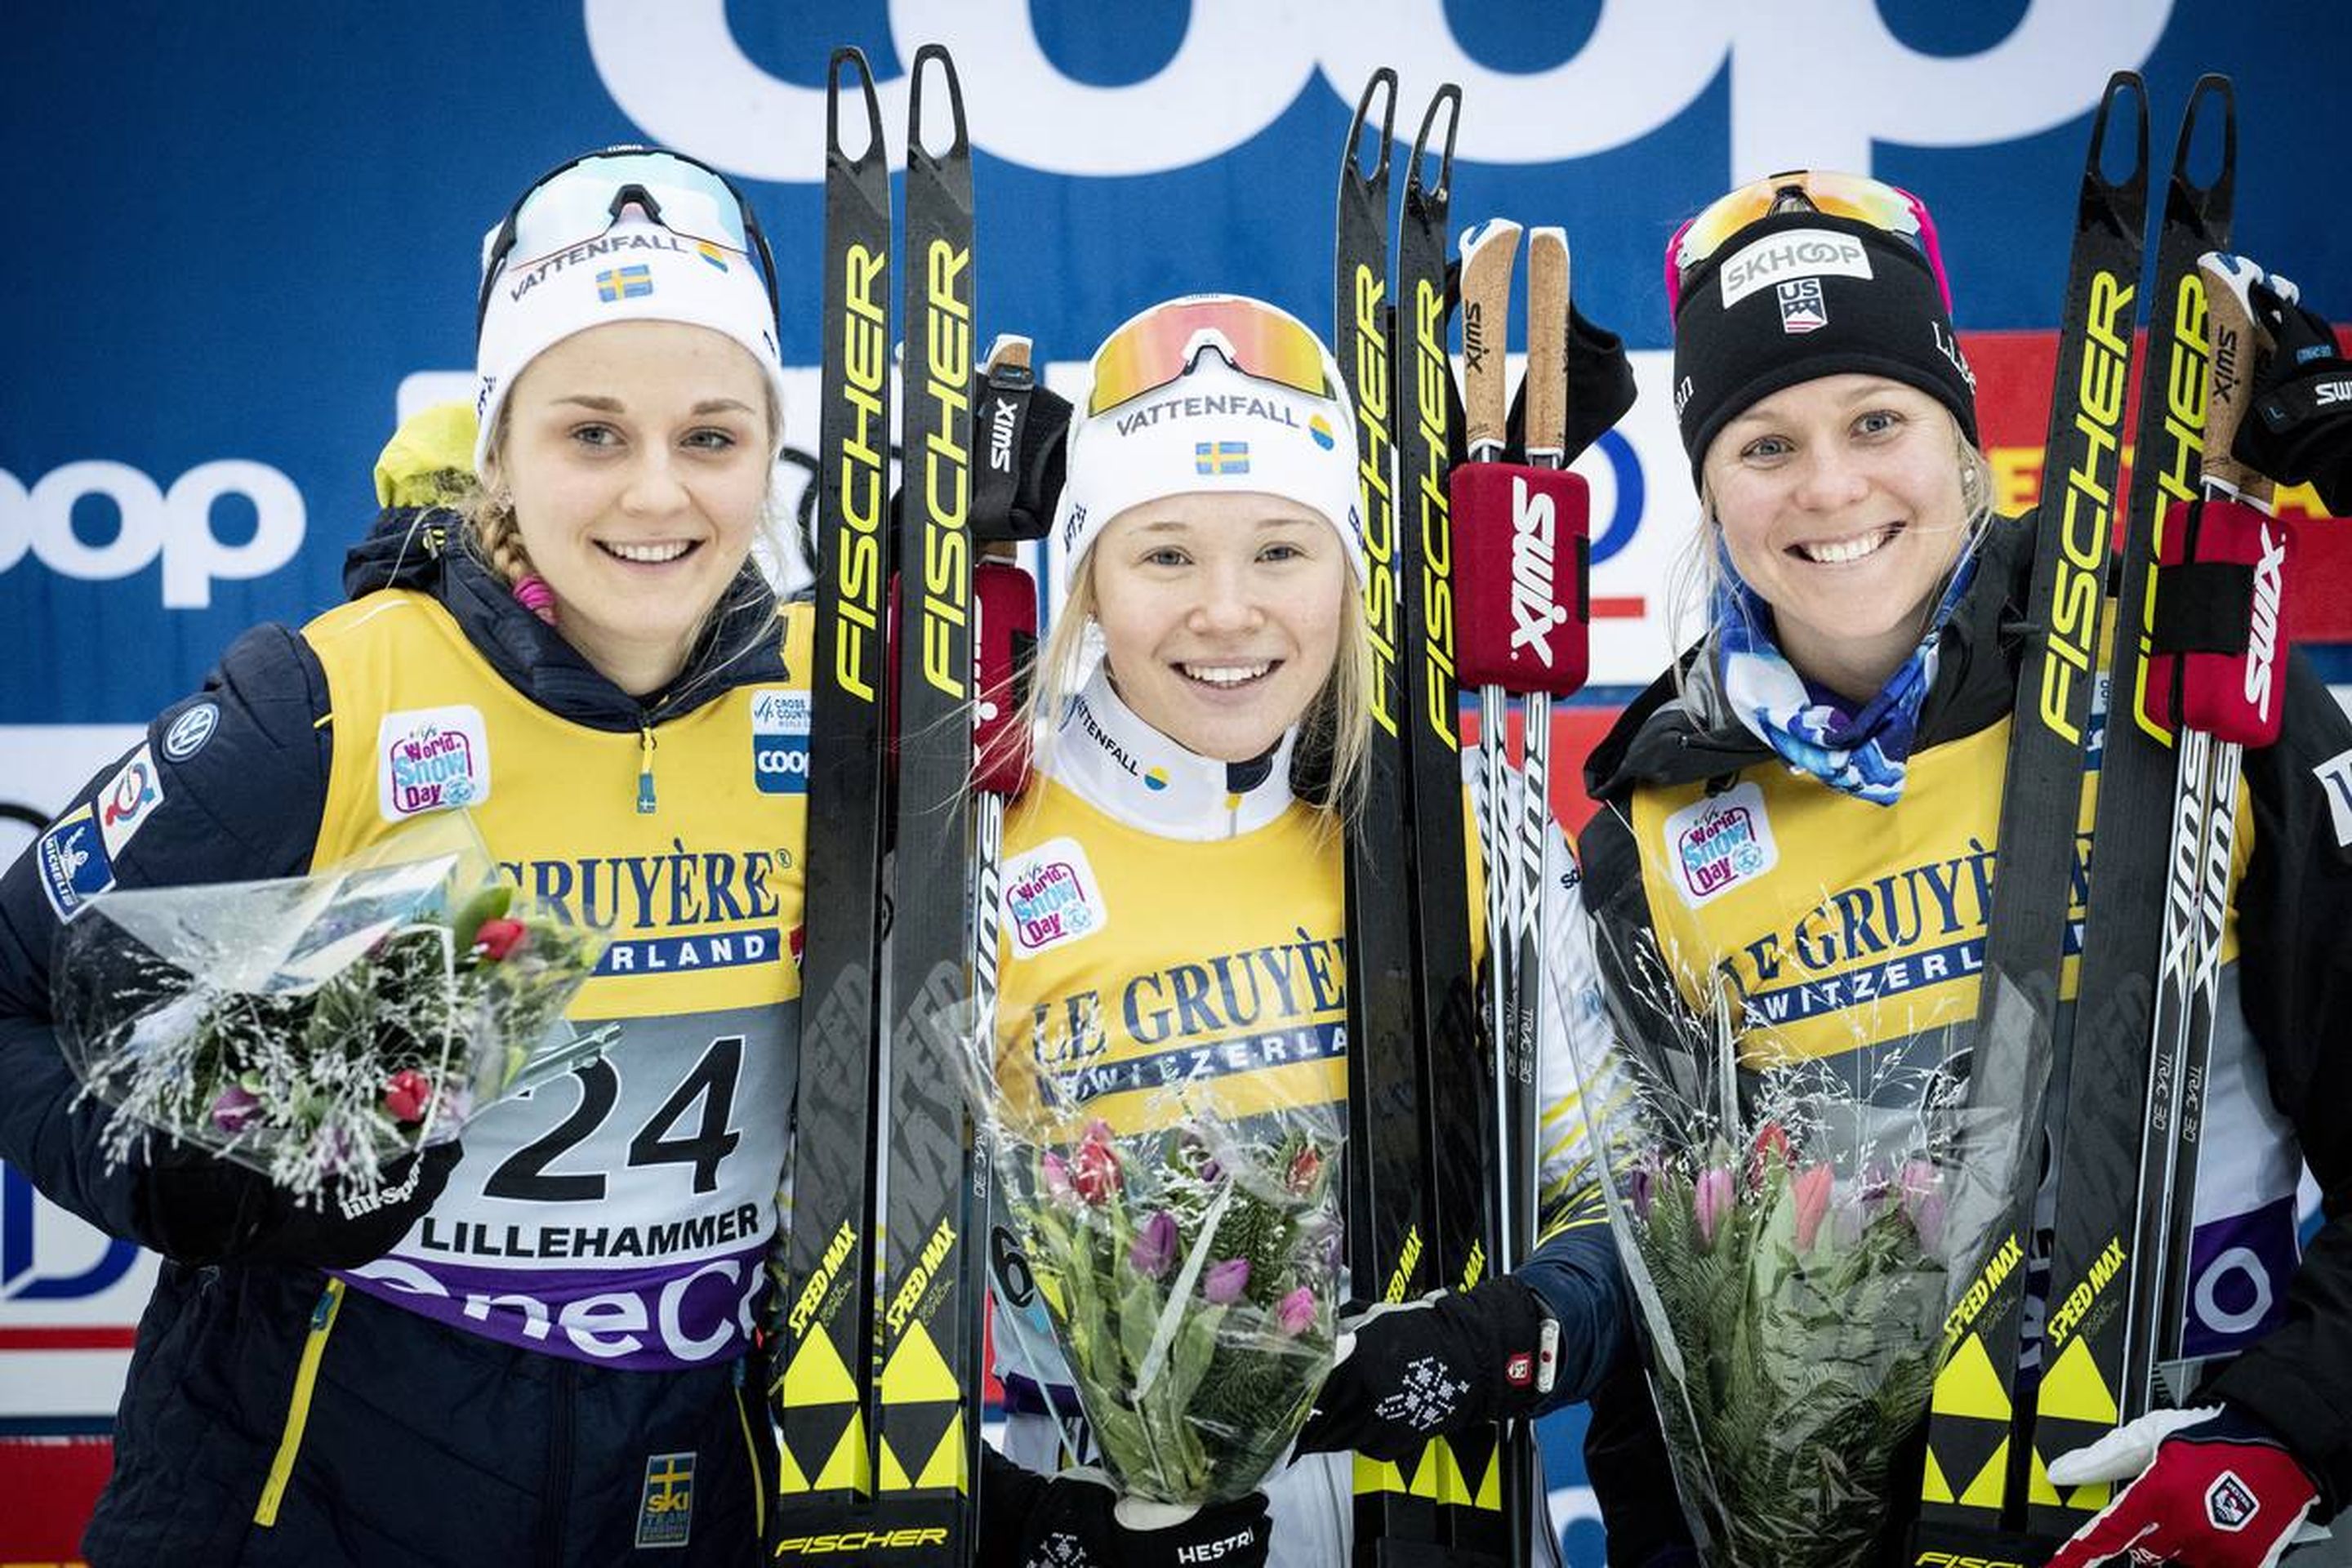 Joanna Sundling took her maiden win at the Lillehammer sprint in freestyle